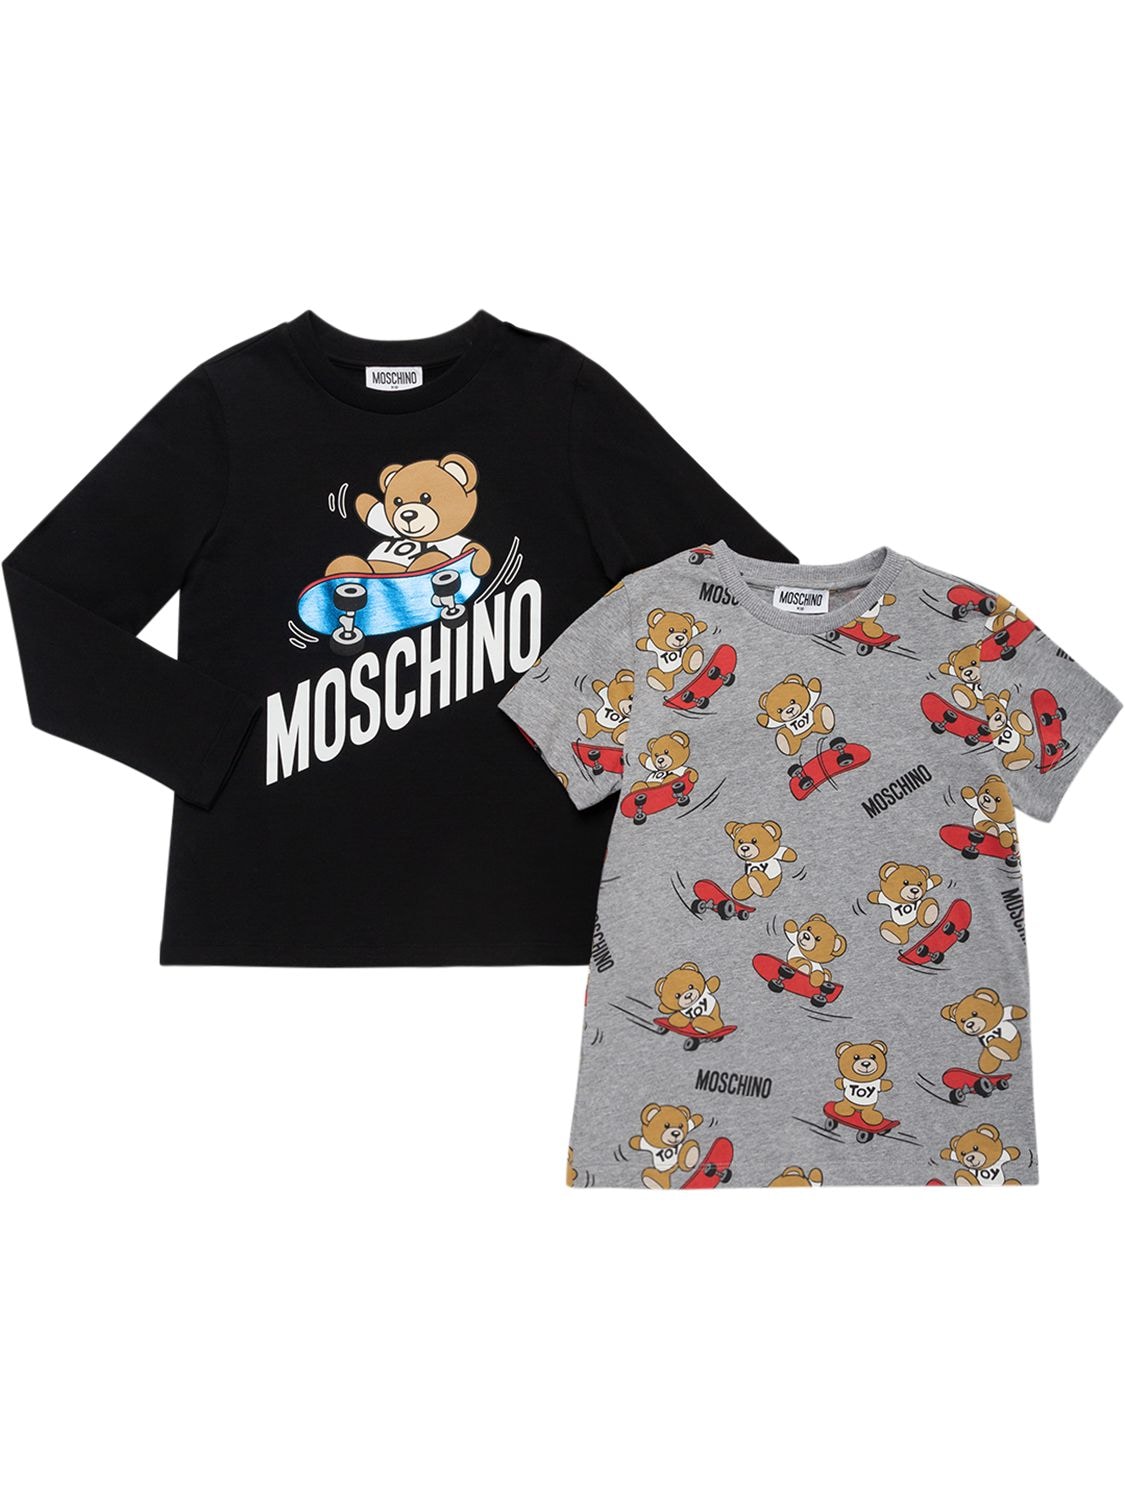 Moschino Kids' Set Of 2 Cotton Jersey T-shirts In Black,grey